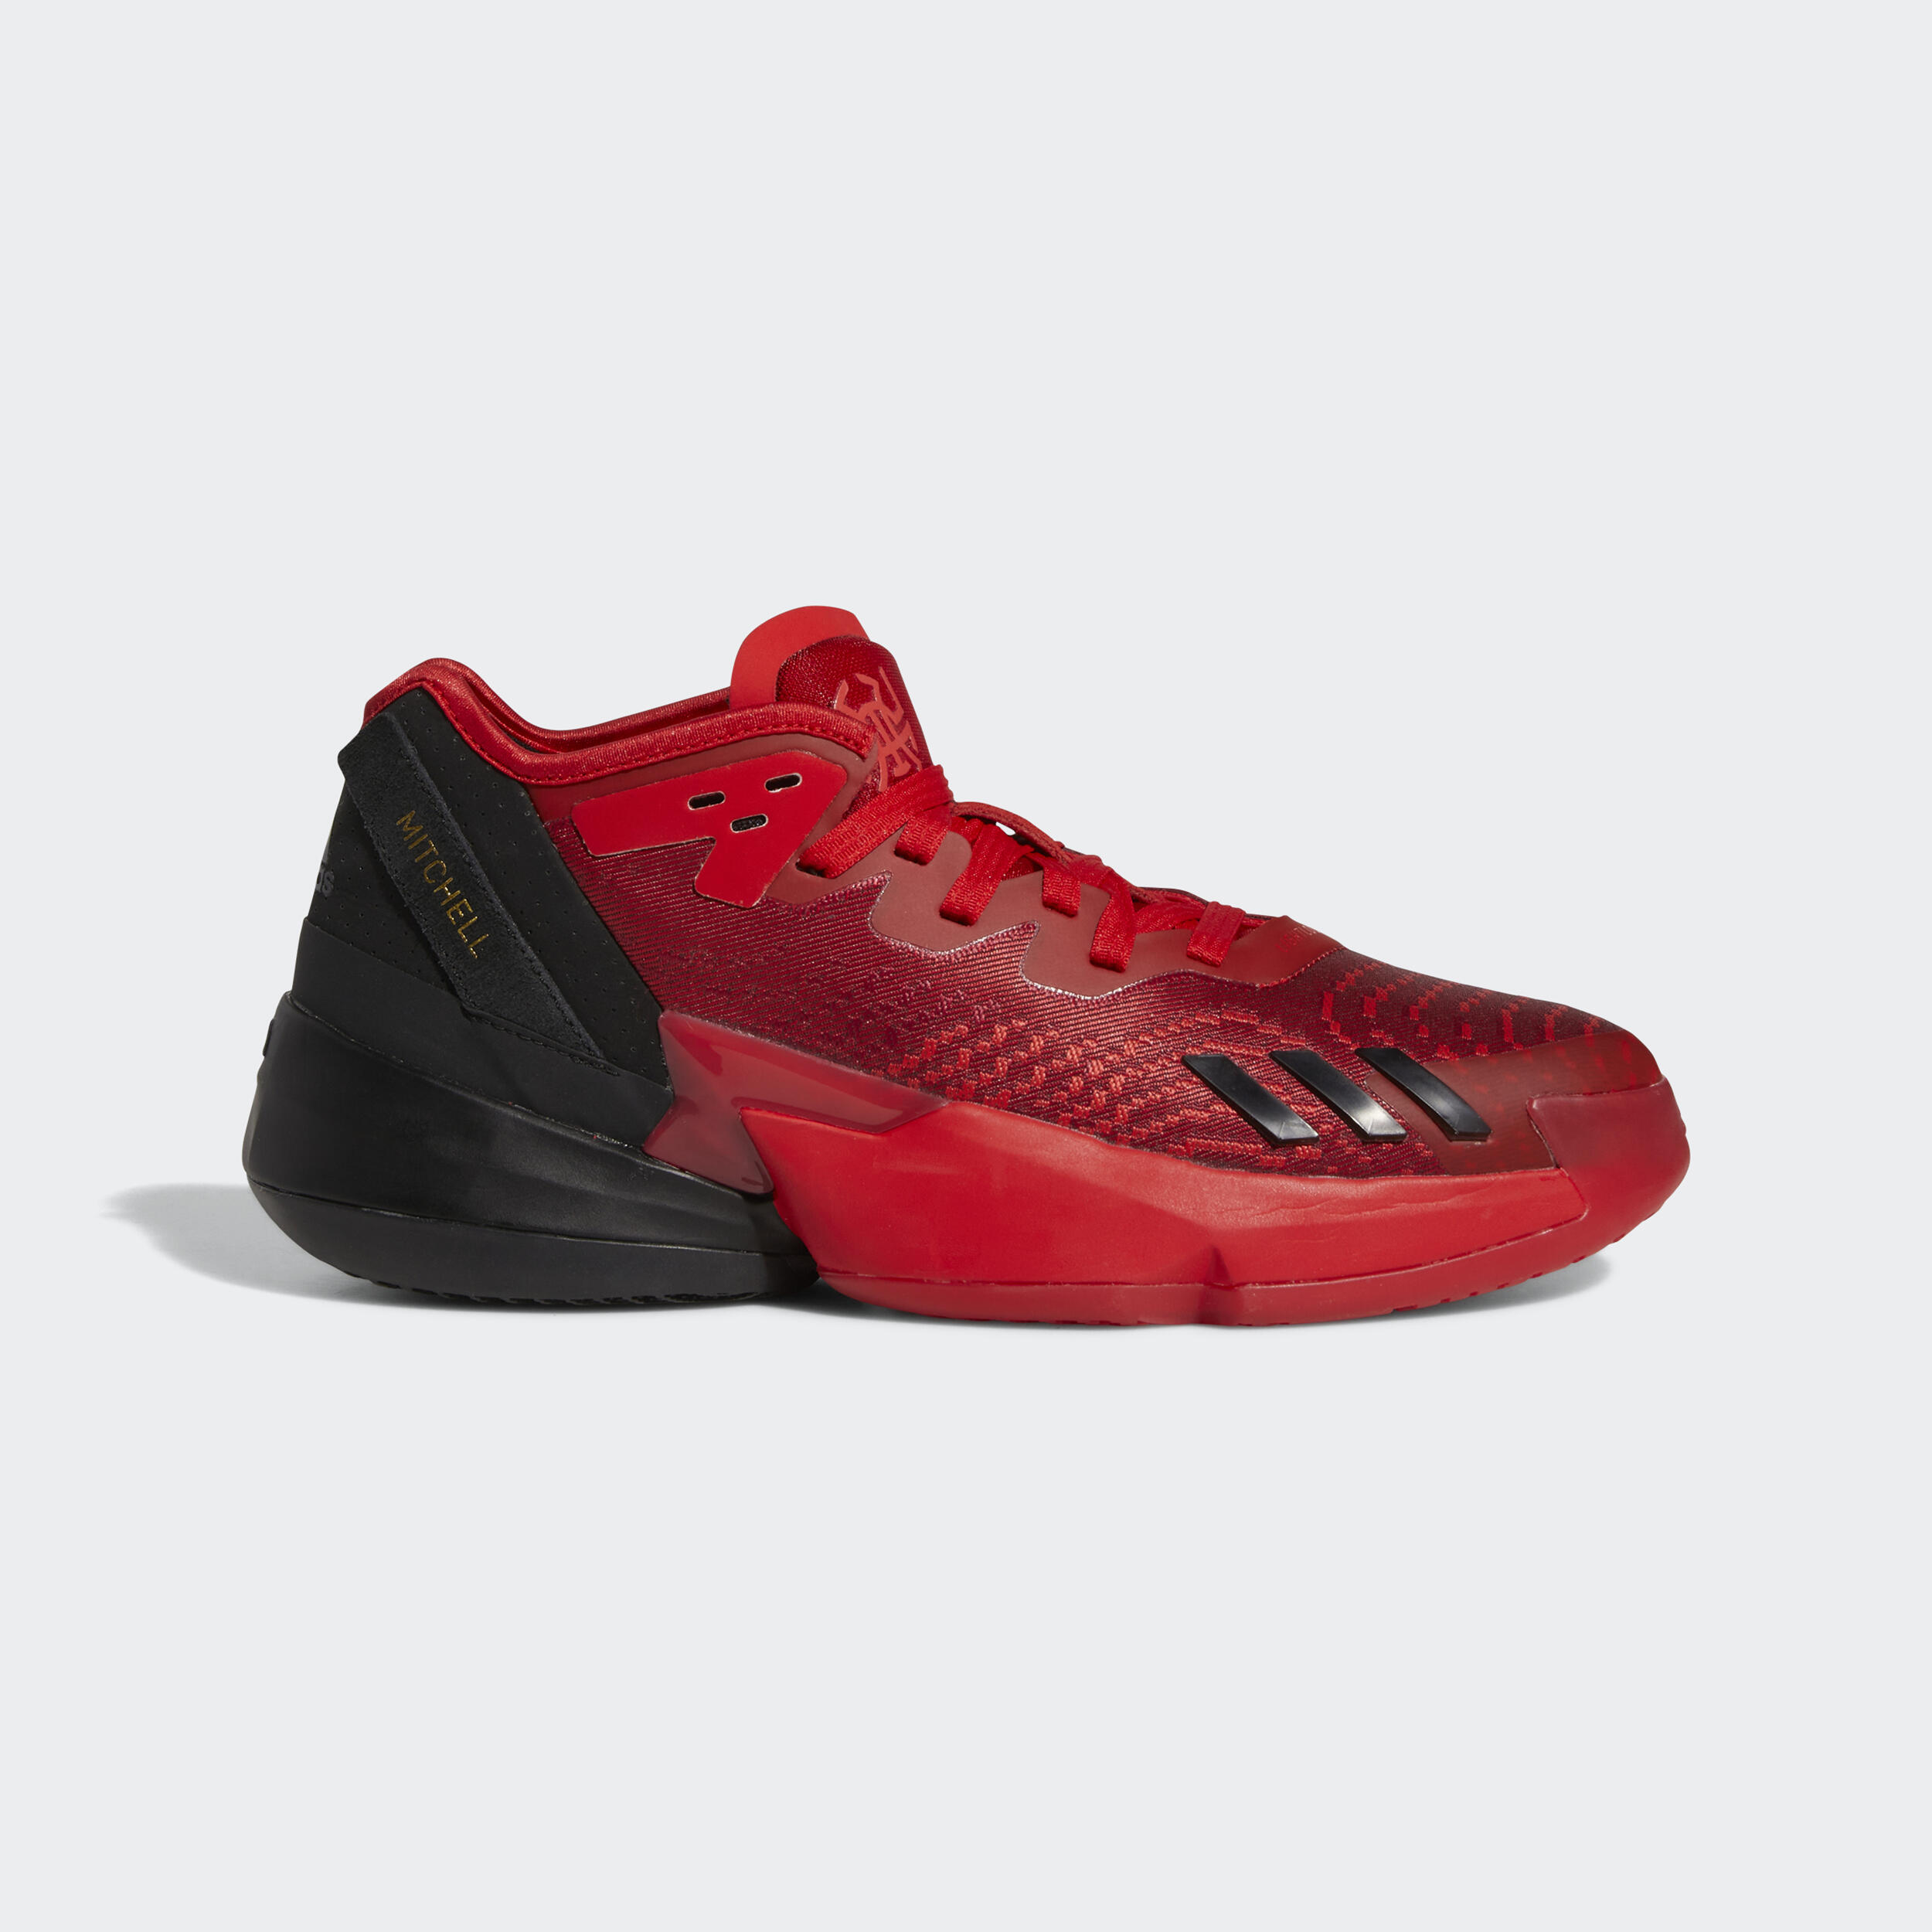 ADIDAS Men's Basketball Shoes D.O.N Issue 4 - Red/Black